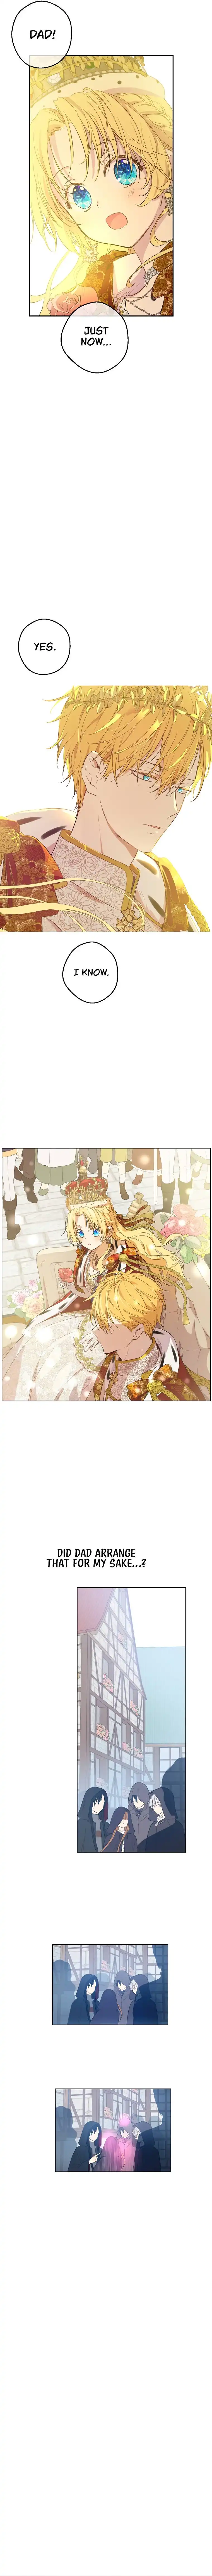 Suddenly Became A Princess One Day Chapter 125